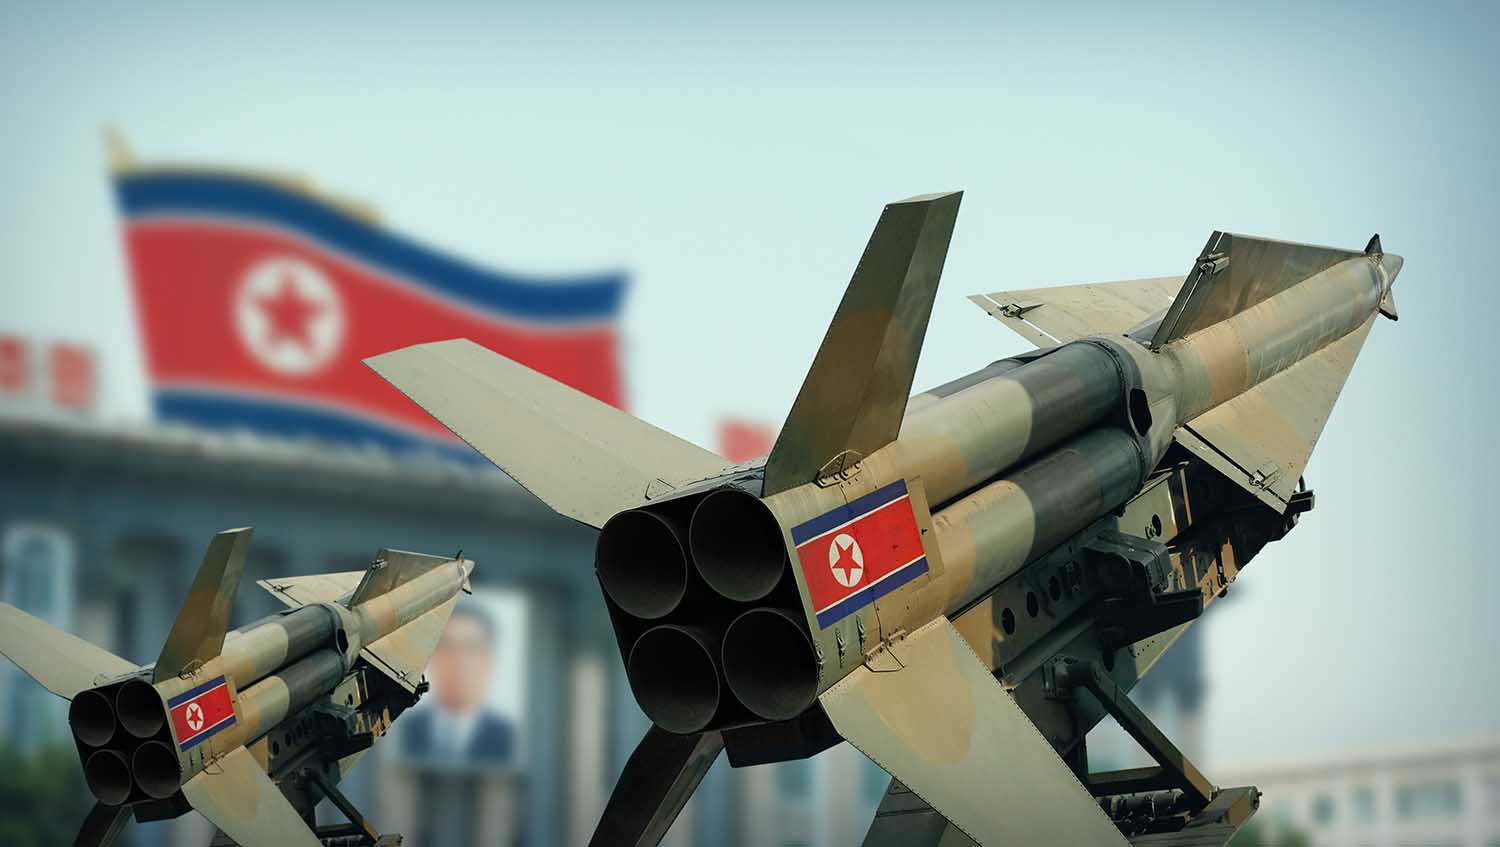 Despite its size and isolationism, North Korea is a global player that continues to juggle relationships between Russia and China.